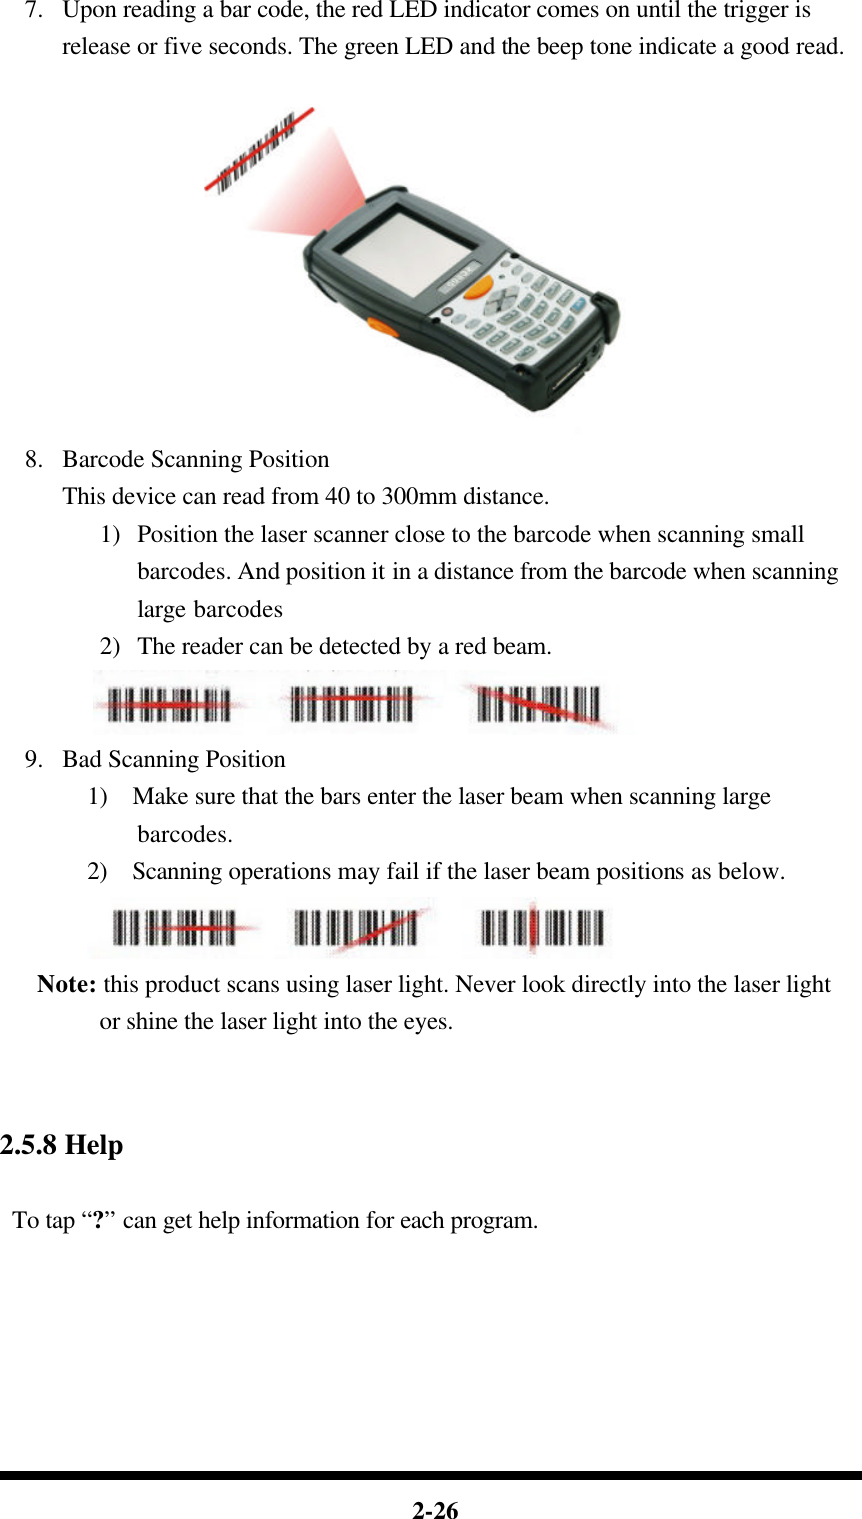  2-26 7.  Upon reading a bar code, the red LED indicator comes on until the trigger is release or five seconds. The green LED and the beep tone indicate a good read.   8.  Barcode Scanning Position This device can read from 40 to 300mm distance. 1) Position the laser scanner close to the barcode when scanning small barcodes. And position it in a distance from the barcode when scanning large barcodes 2) The reader can be detected by a red beam.  9.  Bad Scanning Position 1)  Make sure that the bars enter the laser beam when scanning large barcodes. 2)  Scanning operations may fail if the laser beam positions as below.  Note: this product scans using laser light. Never look directly into the laser light or shine the laser light into the eyes.    2.5.8 Help  To tap “?” can get help information for each program.      